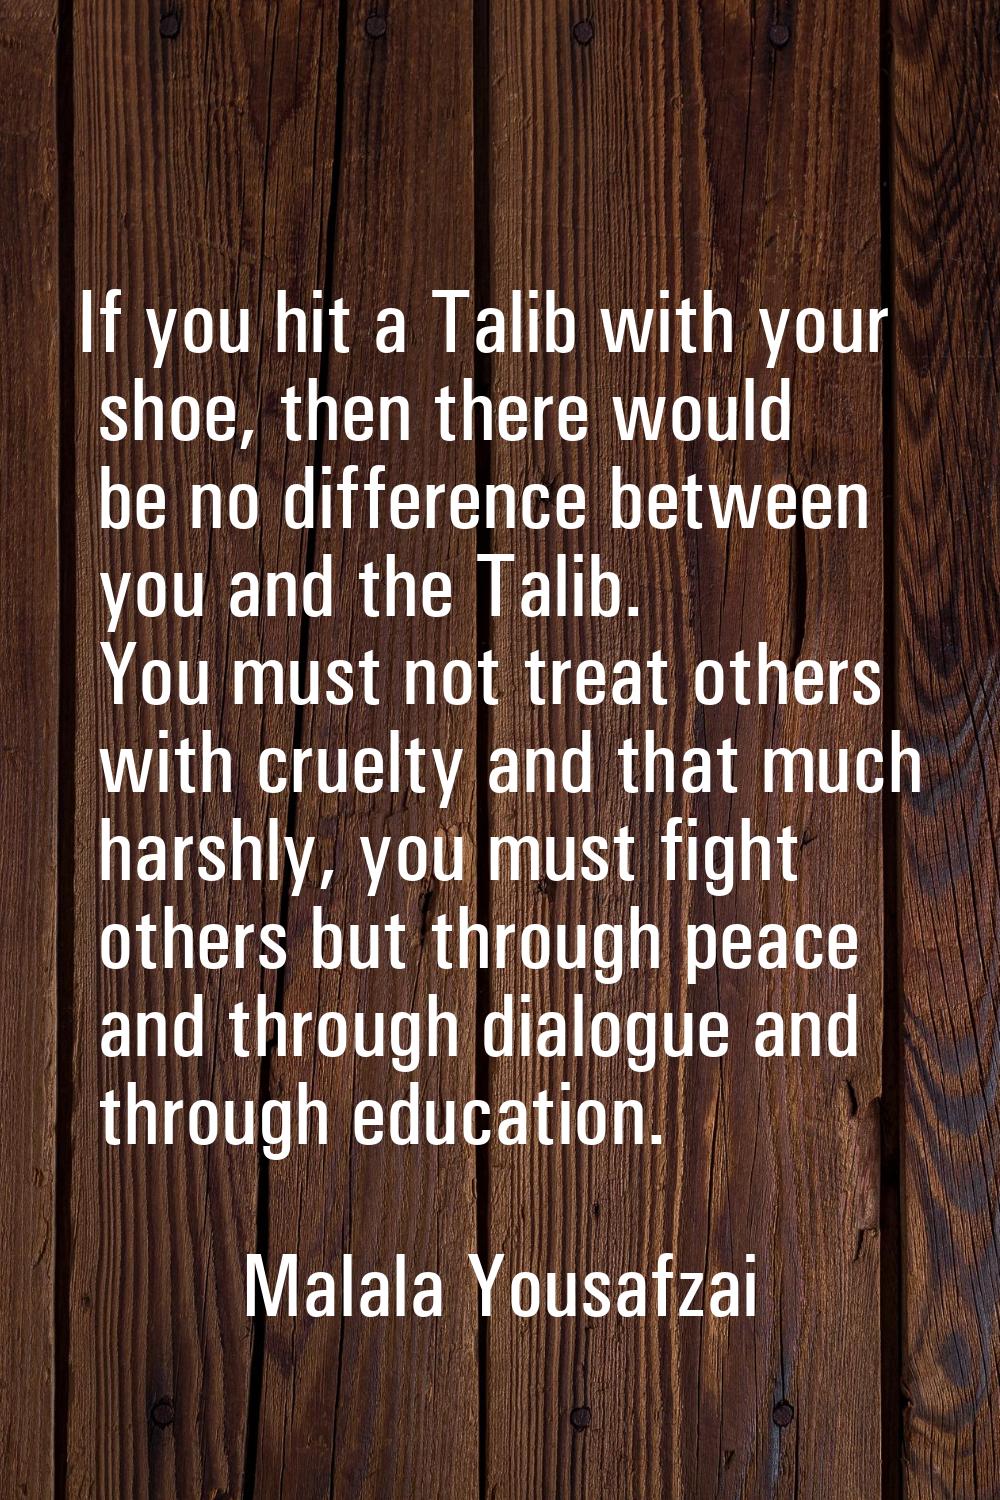 If you hit a Talib with your shoe, then there would be no difference between you and the Talib. You